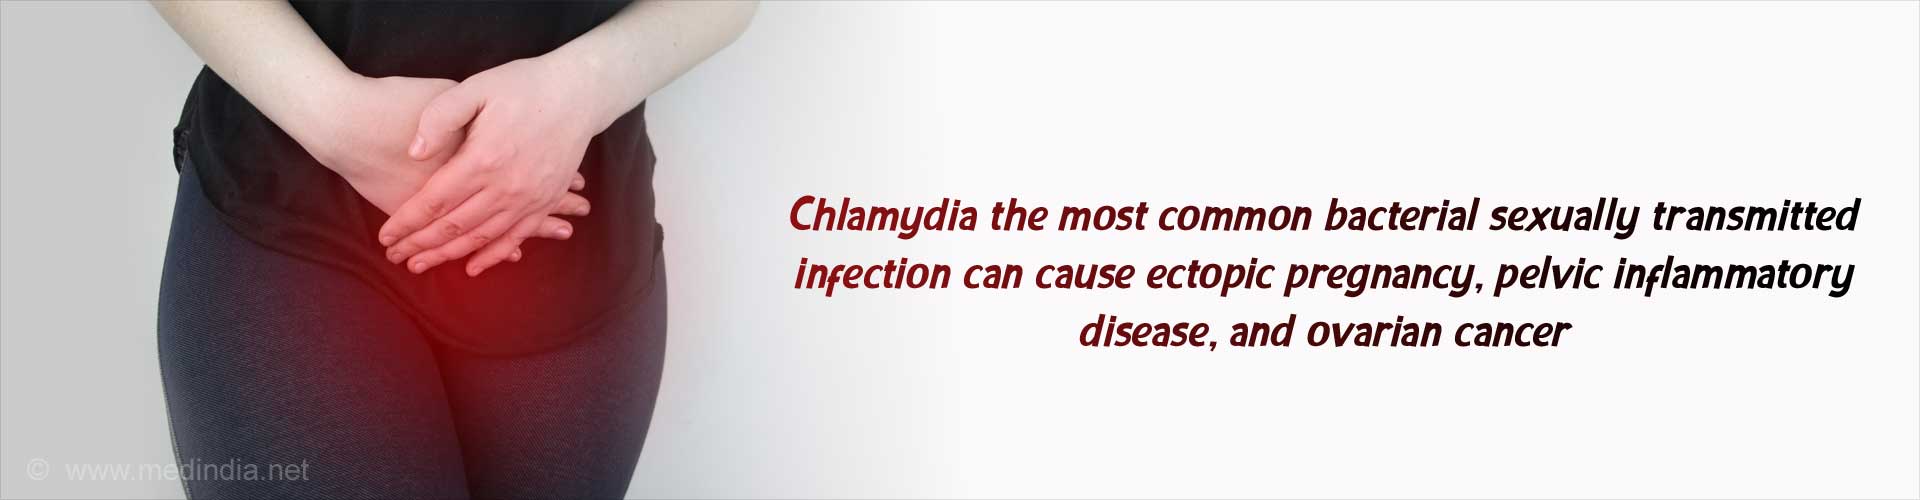 Sexually Transmitted Infection Chlamydia Might Increase Ectopic Pregnancy And Cancer 9020